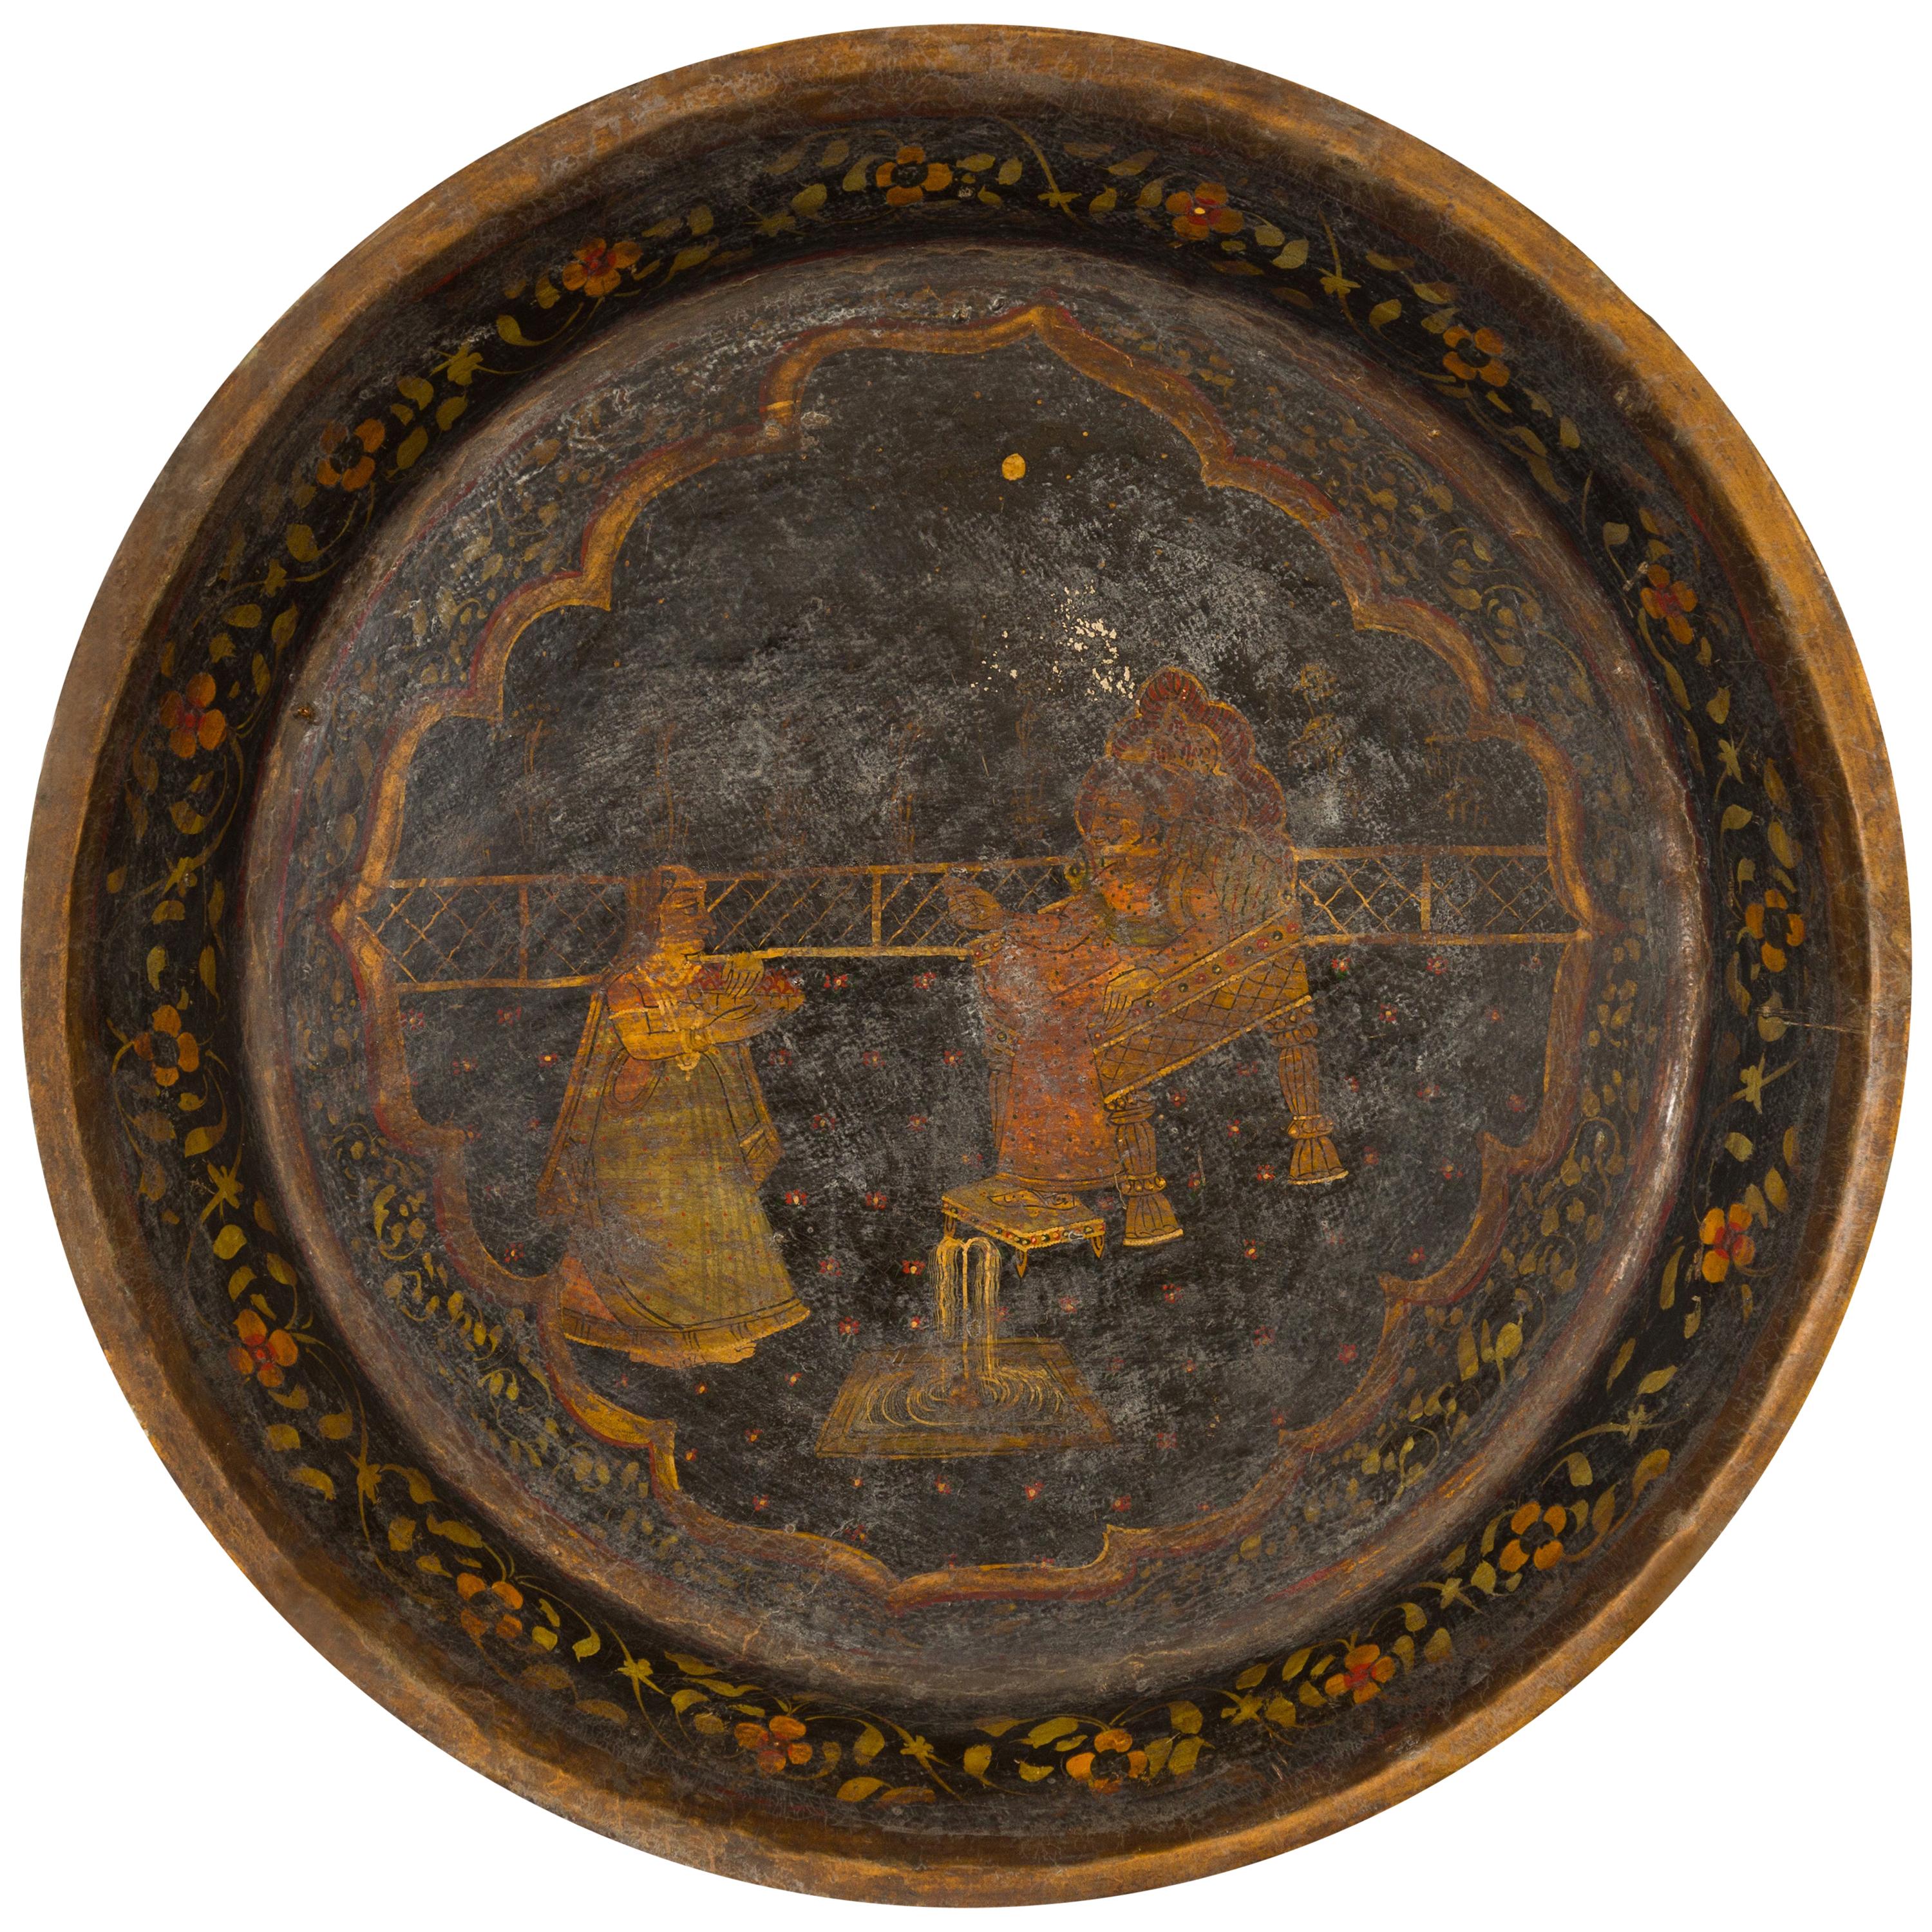 Antique Indian Market Tray with Mughal Inspired Hand Painted Décor